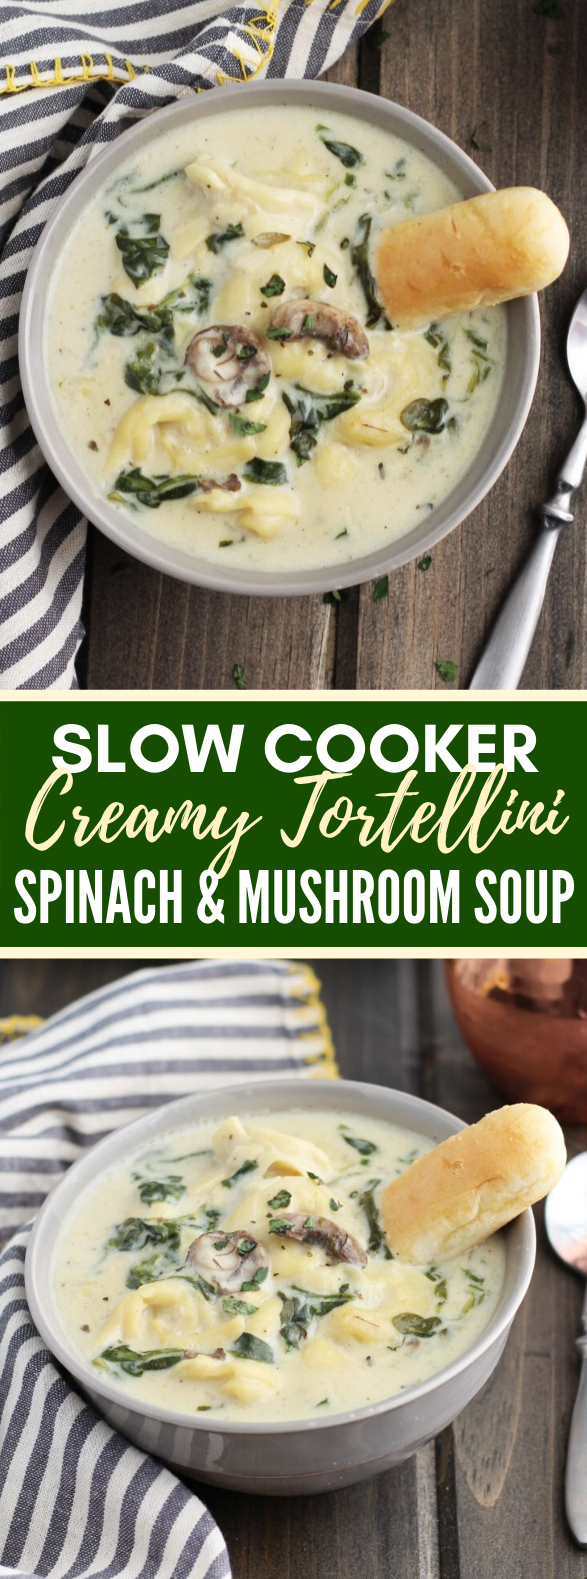 SLOW COOKER CREAMY TORTELLINI SPINACH AND MUSHROOM SOUP #vegetarian #lunch